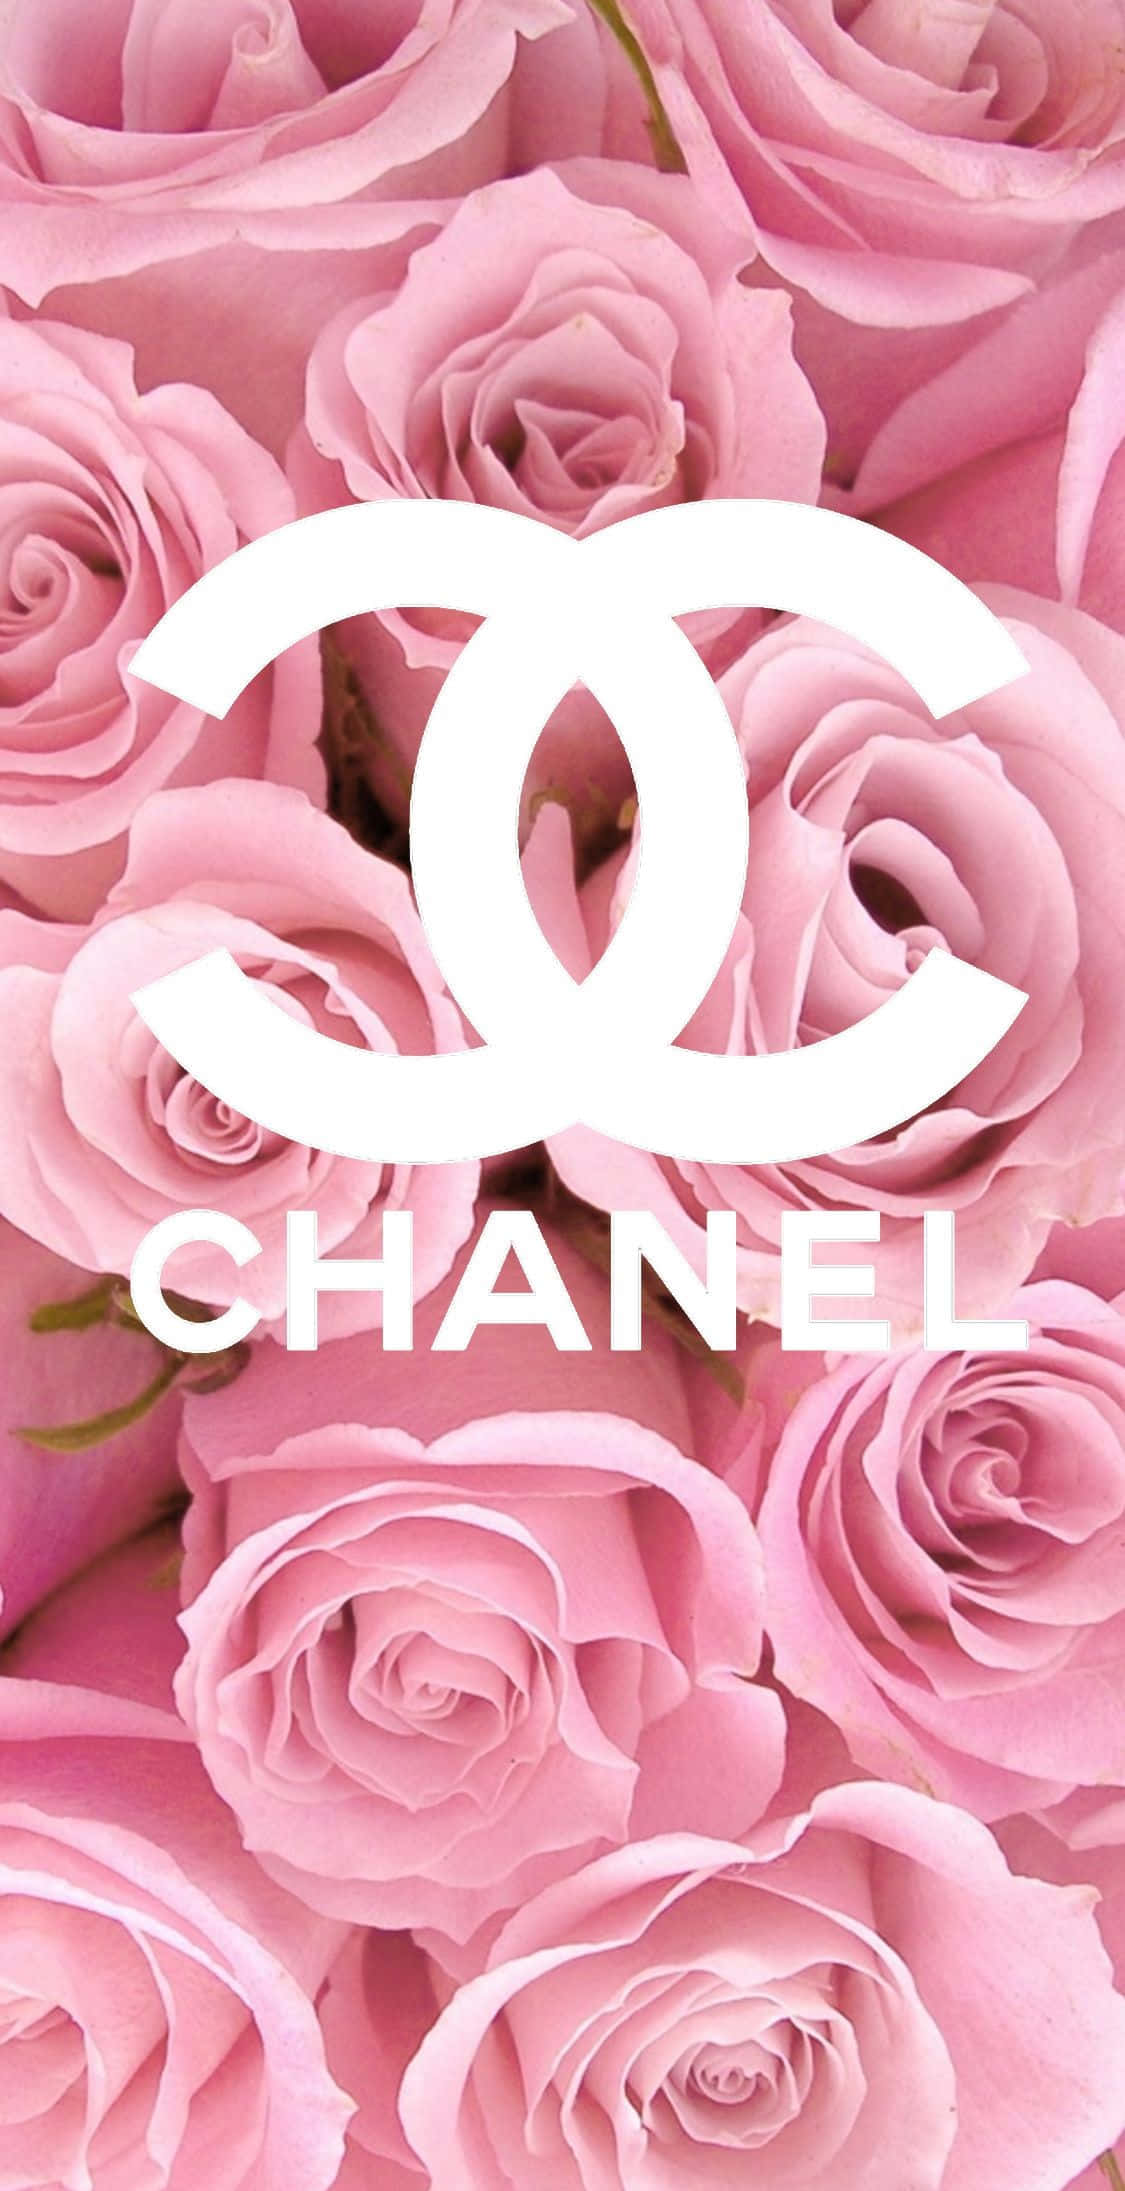 Download The iconic logo of luxury French fashion house Chanel